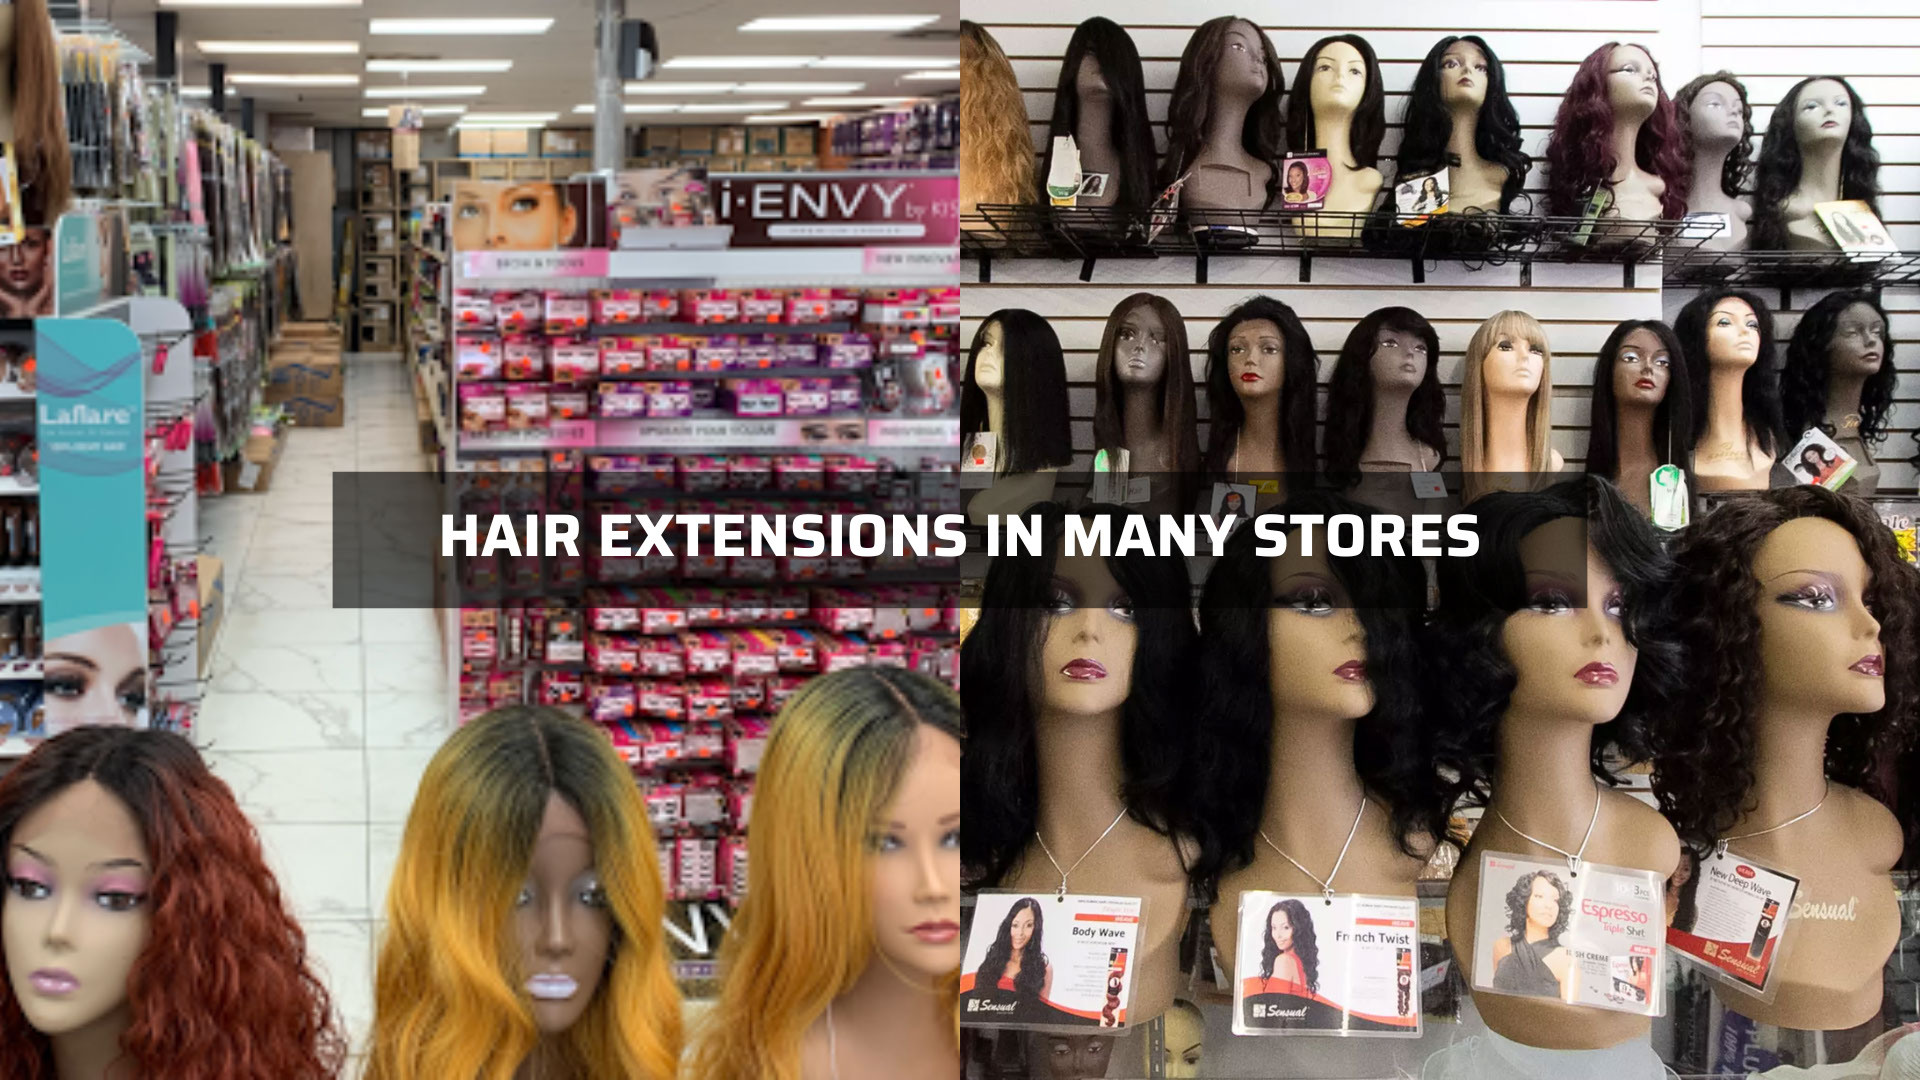 Hair extensions are popular in Nigeria